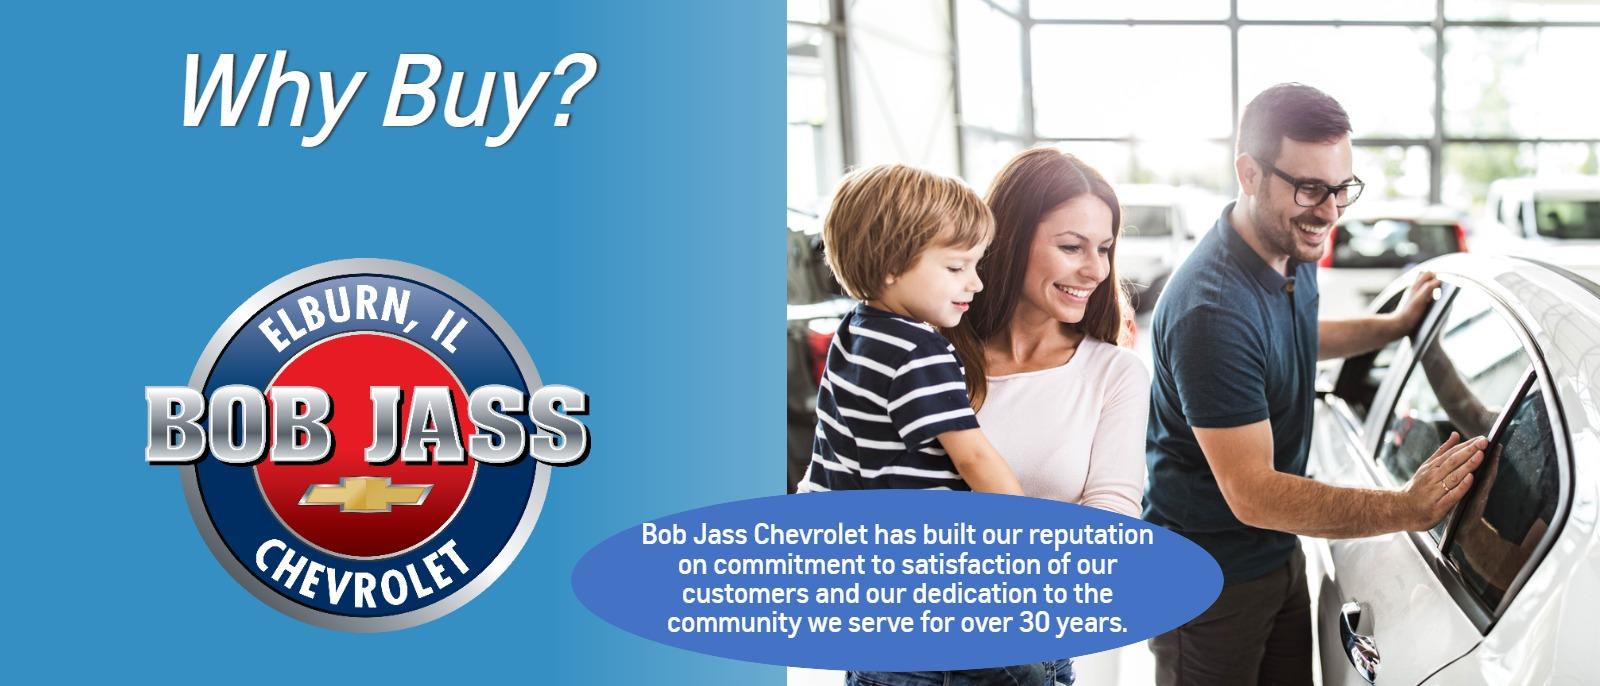 Bob Jass Chevrolet has built our reputation on commitment to satisfaction of our customers and our dedication to the community we serve for over 30 years.